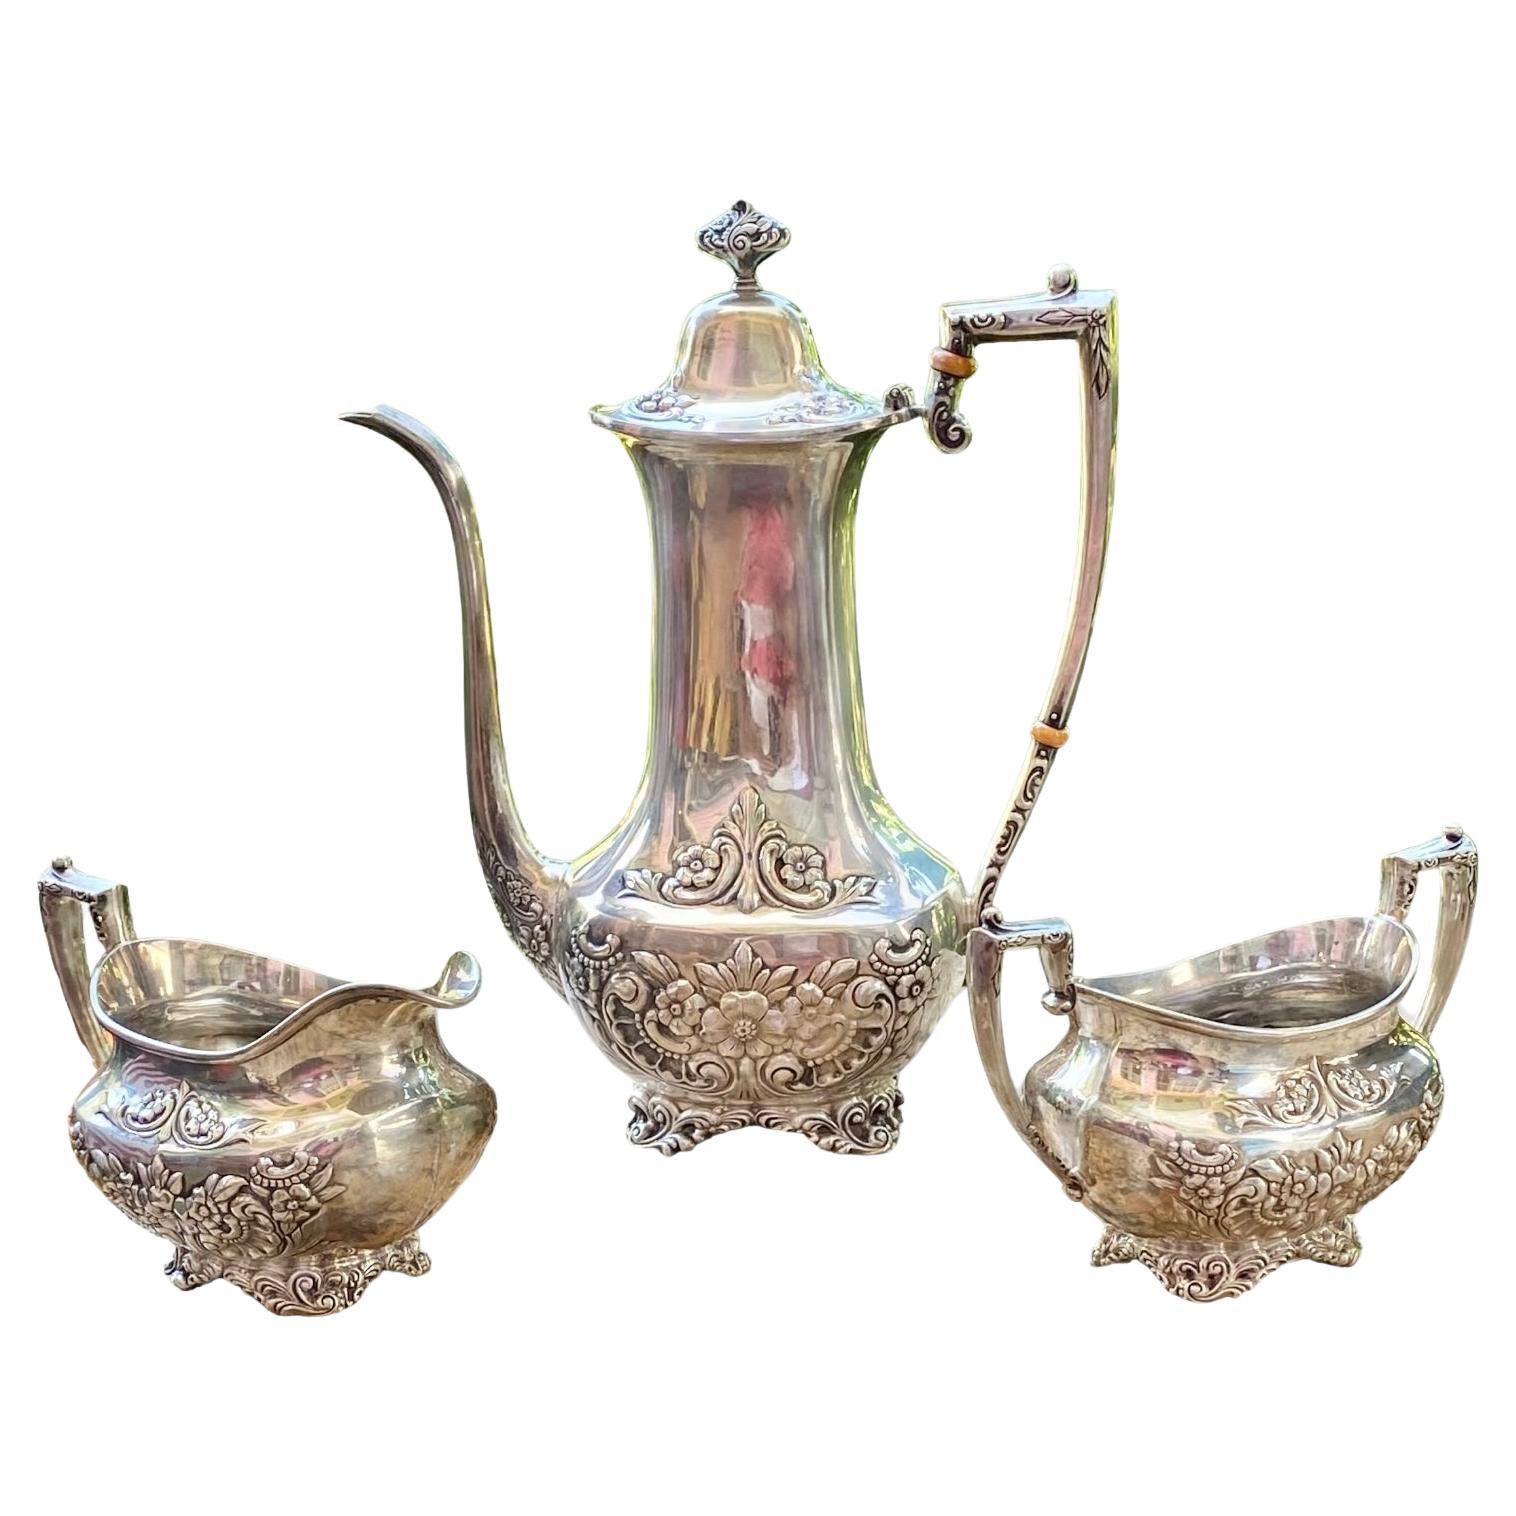 Botticelli Pattern After-Dinner Coffee Set Sterling FRANK WHITING